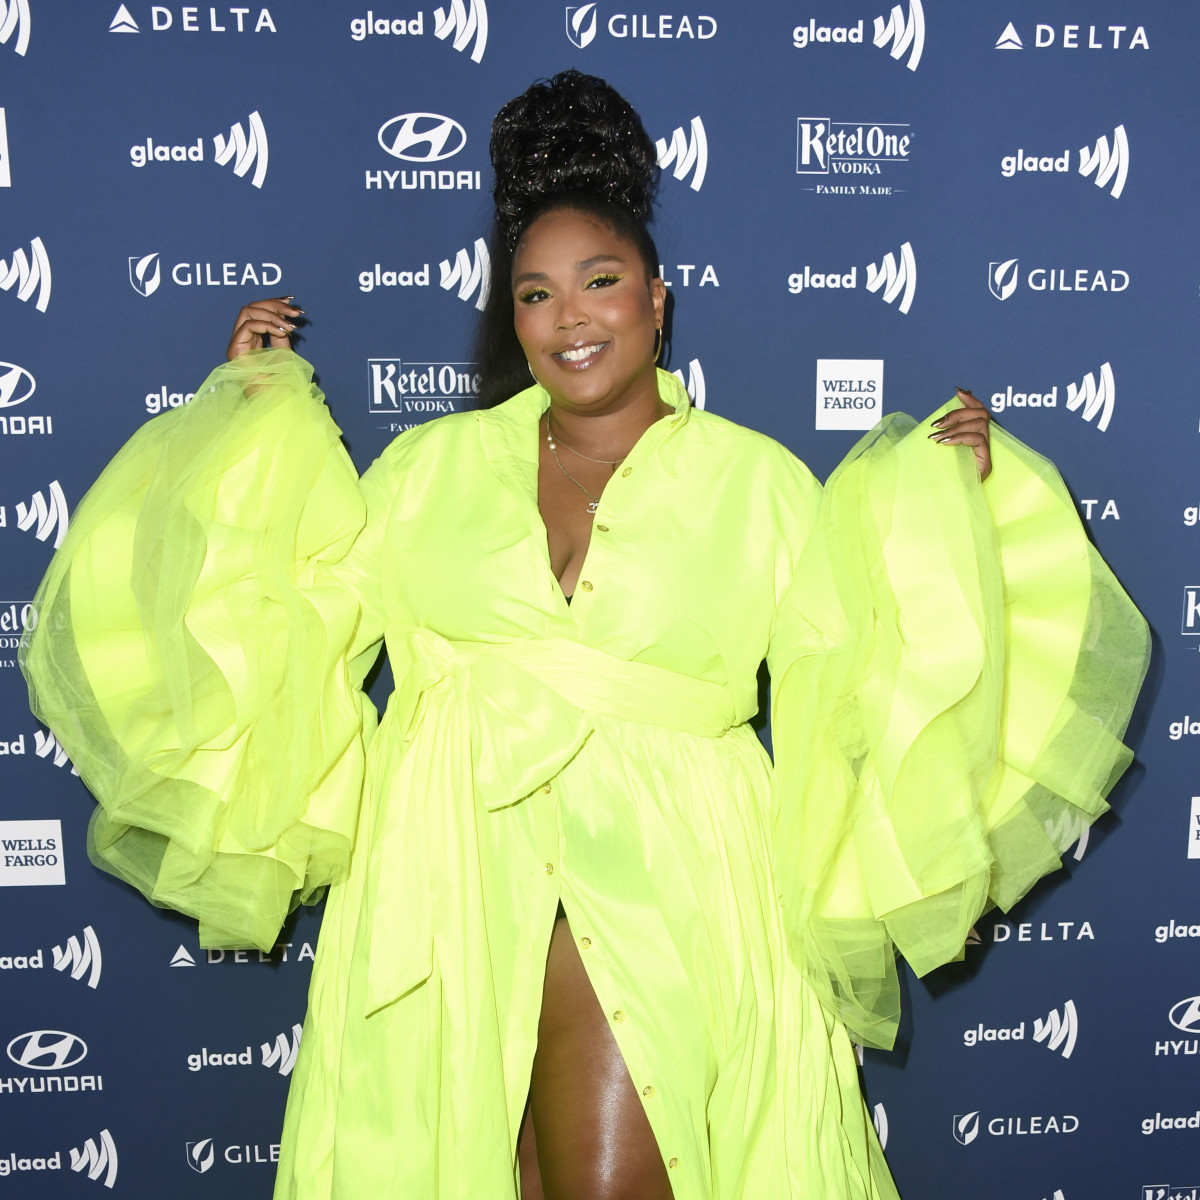 a-look-at-the-career-of-lizzo-from-indie-artist-to-pop-sensation